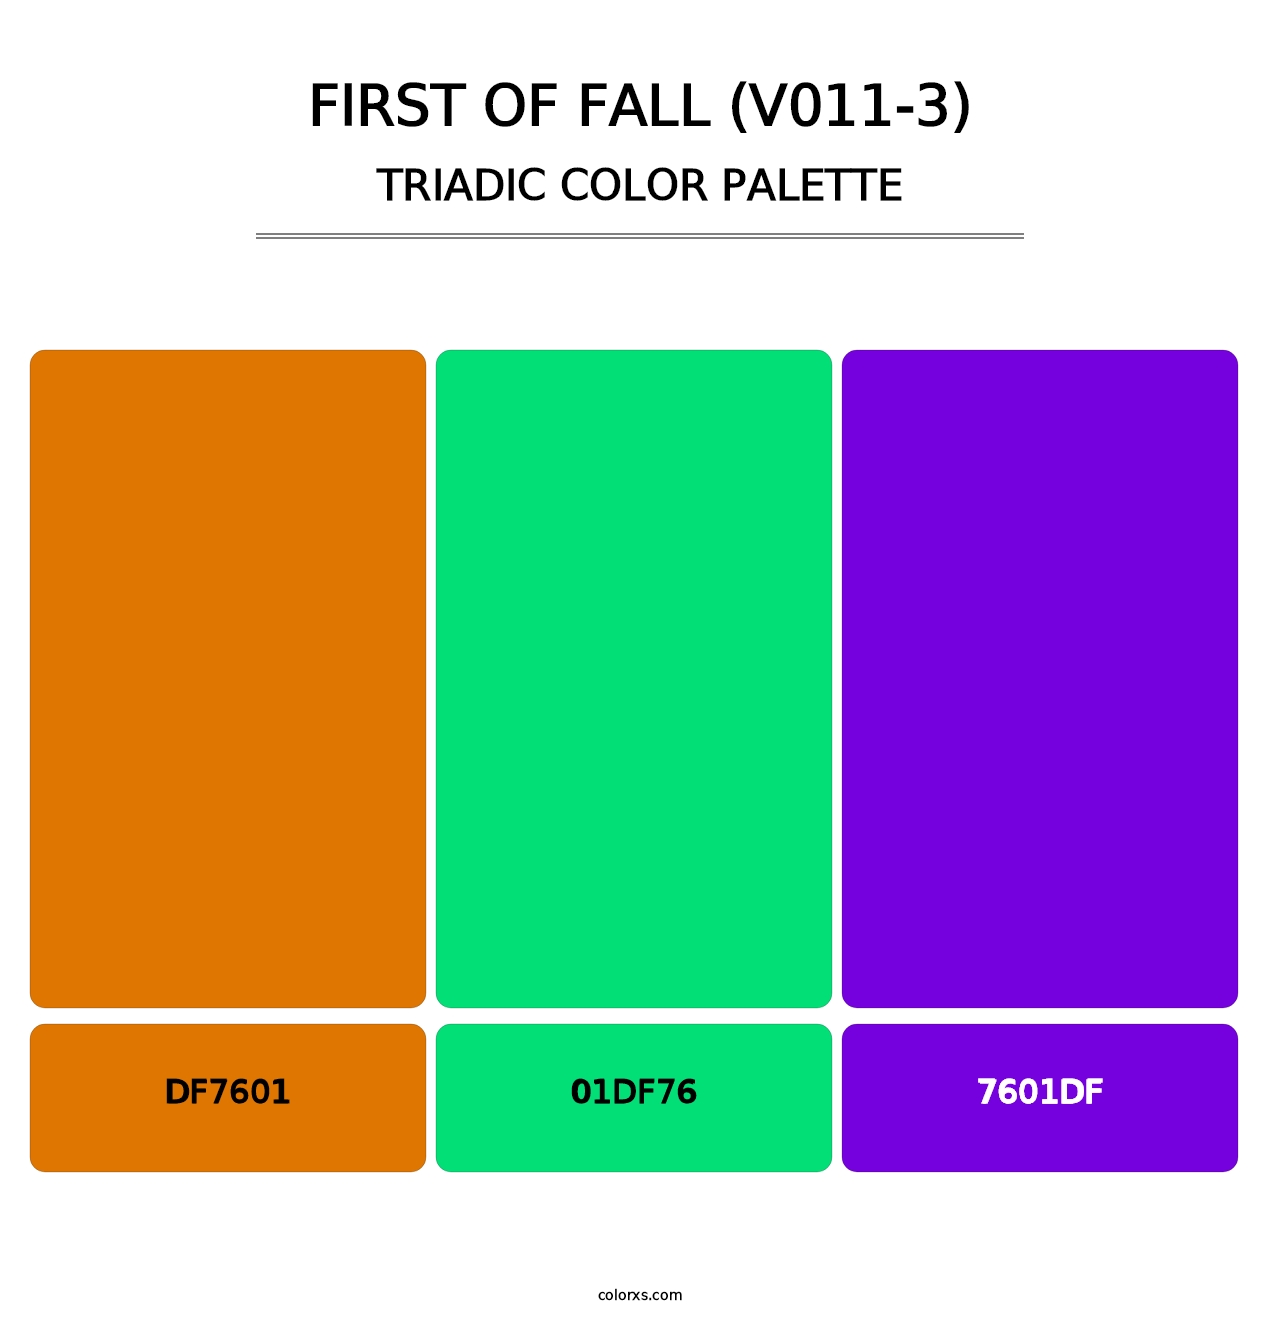 First of Fall (V011-3) - Triadic Color Palette